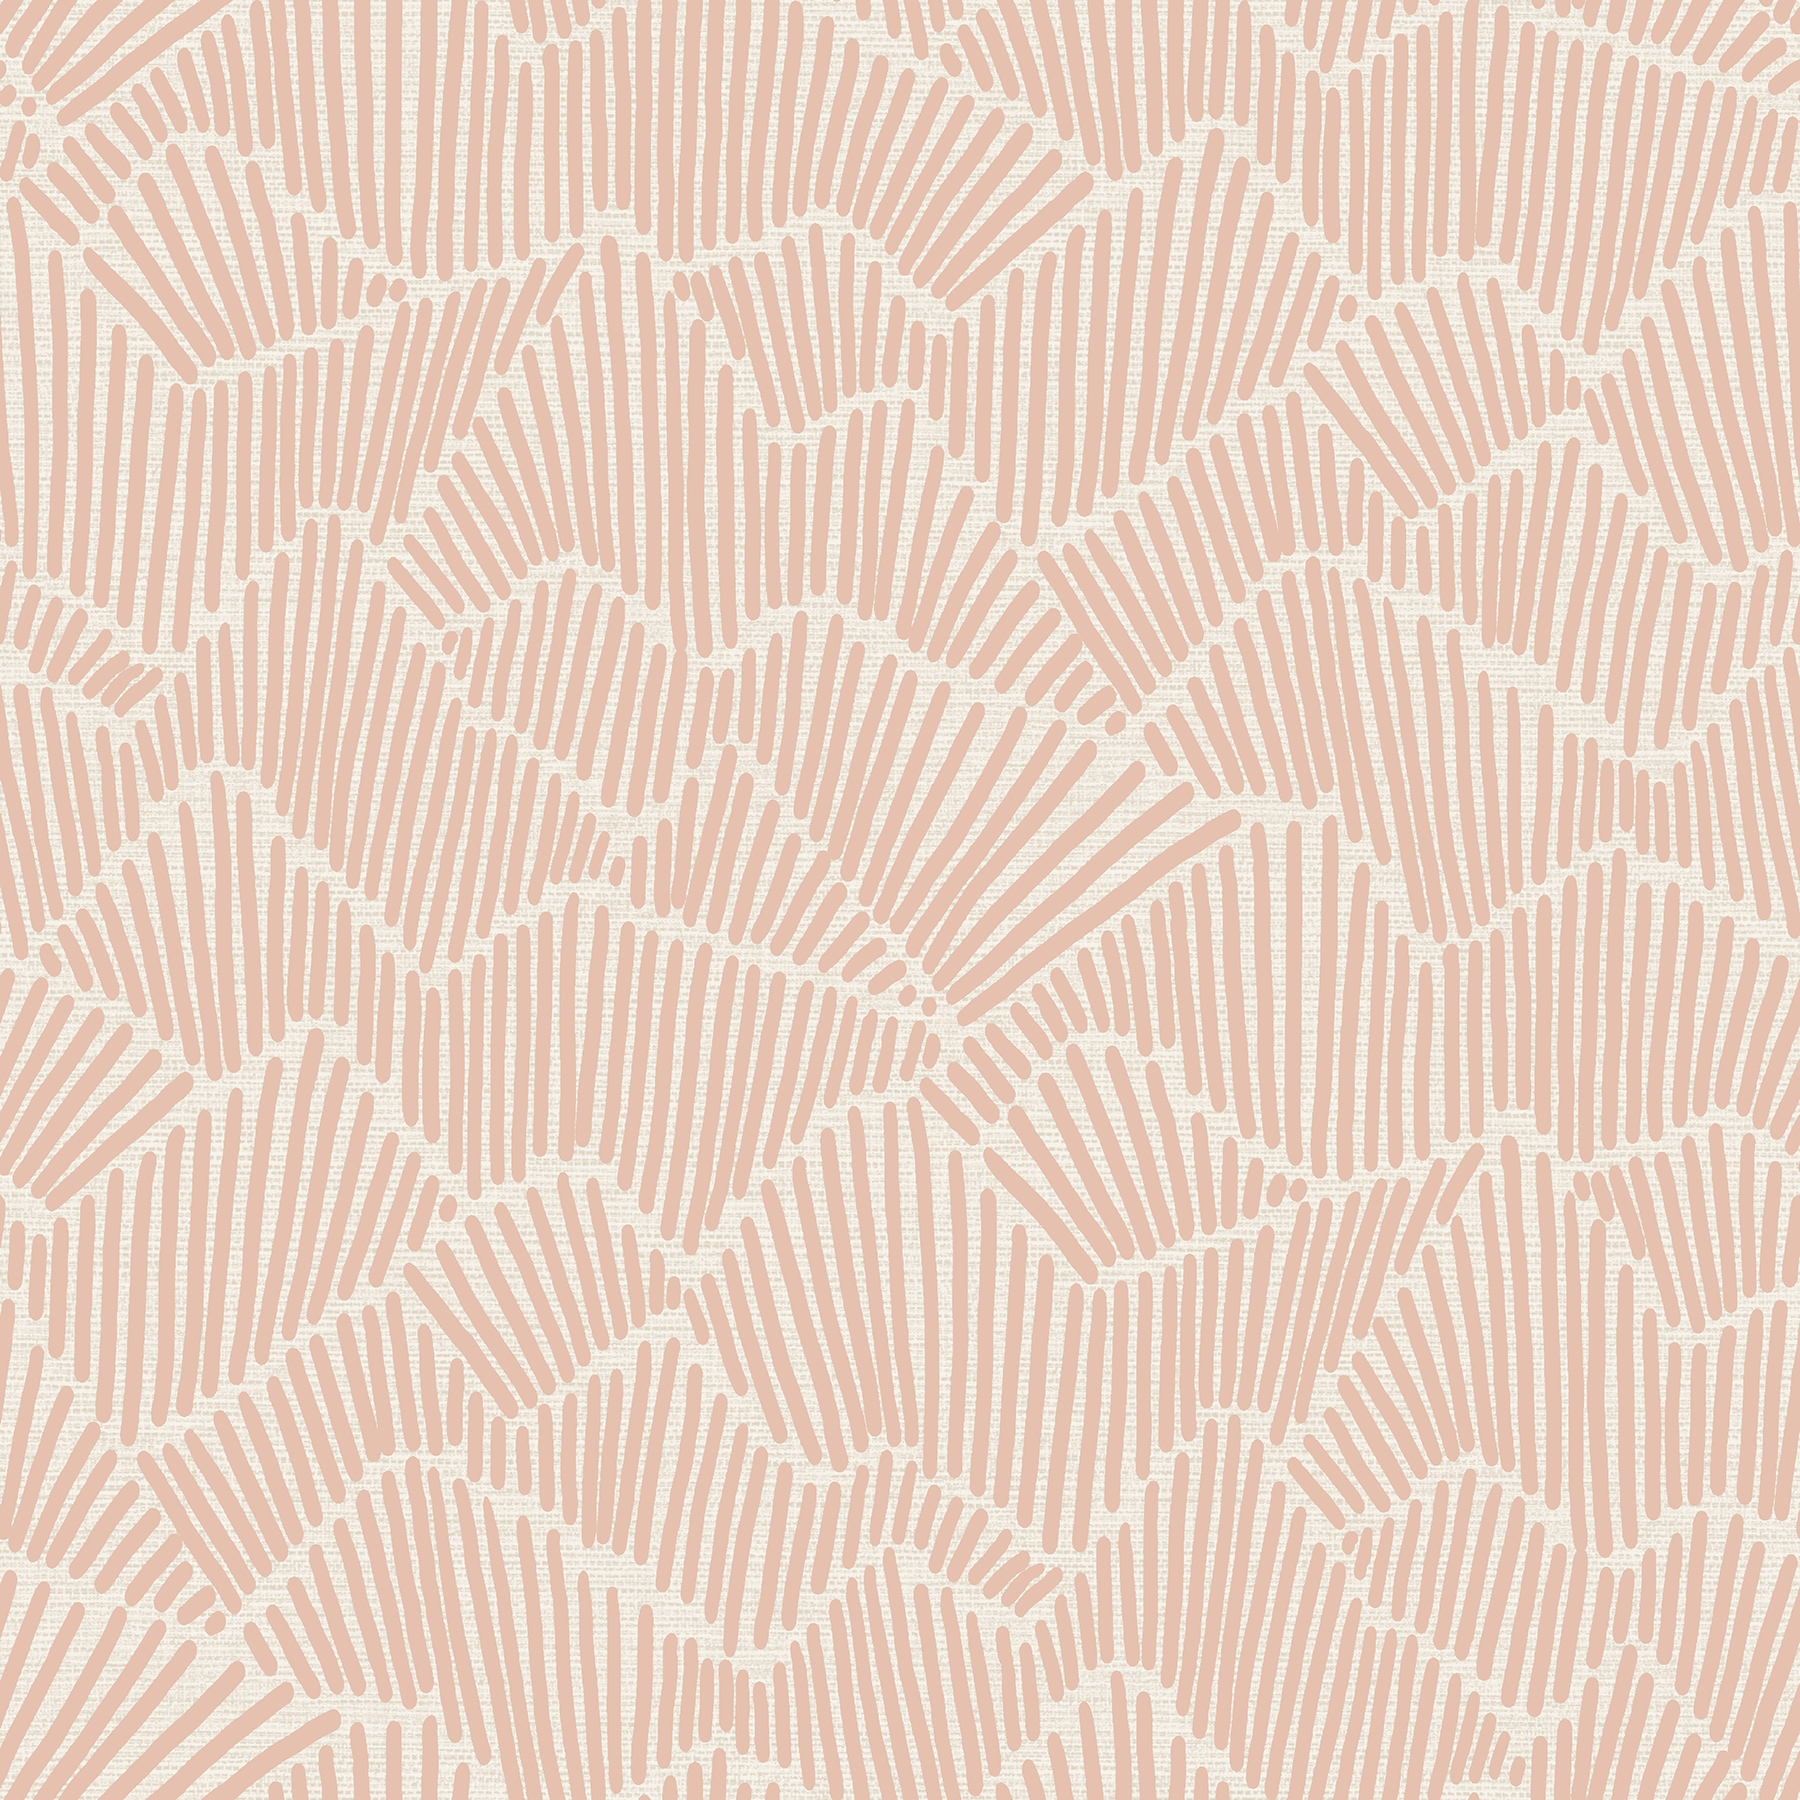 Accent your space with a subtle pop of dimension using this peel and stick NuWallpaper print designed by Egypt Sherrod. Clay-toned linework creates a ridge and valley effect atop a dimensional-looking background. Clay Ridge & Valley Peel and Stick Wallpaper comes on one roll that measures 20.5 inches wide by 18 feet long.